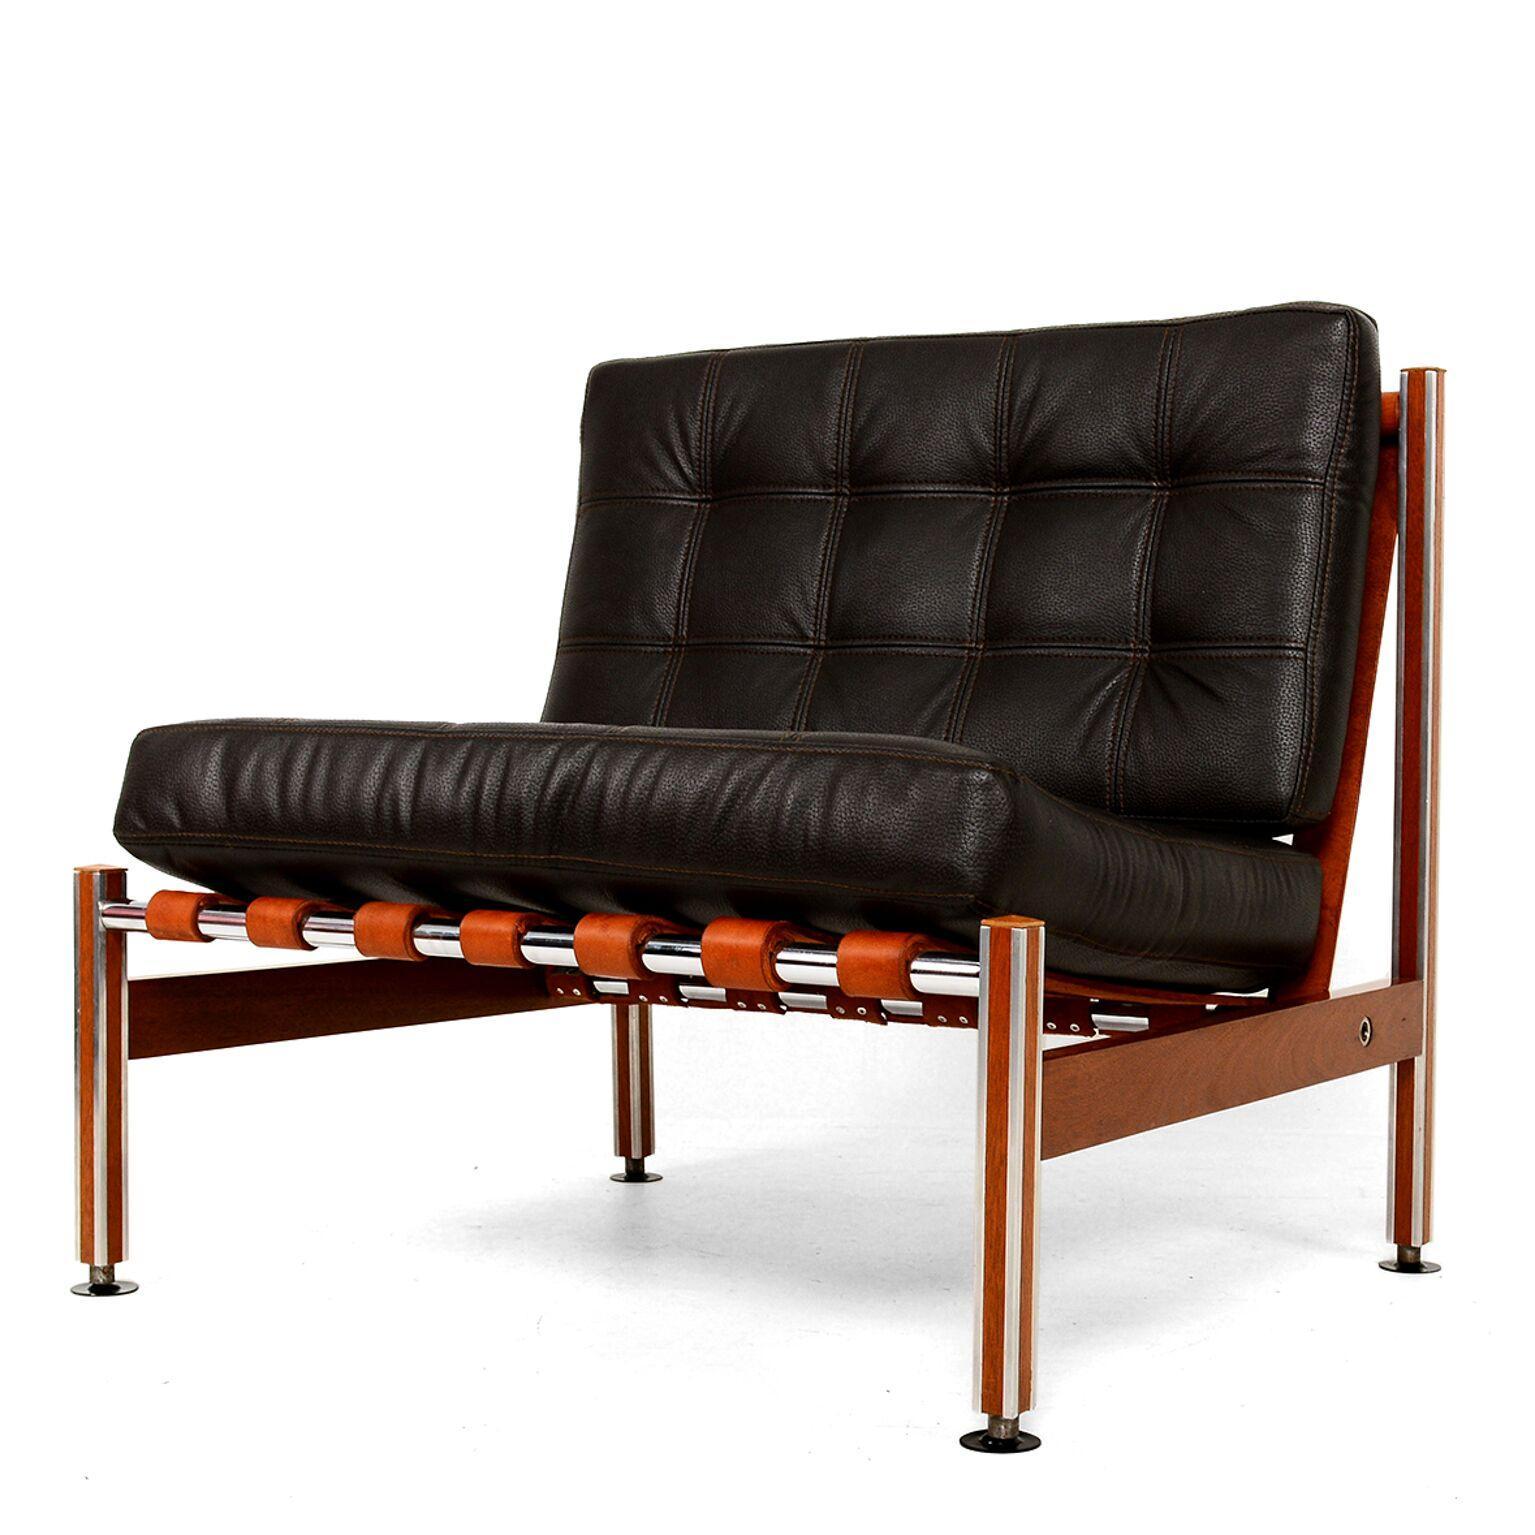 Barcelona Style
Faux Black Leather Barcelona Style Lounge chairs constructed in Aluminum on a Mahogany Wood frame.
In the classic Barcelona design of Ludwig Mies van der Rohe. No maker stamp is present.
Tanned Leather straps are secured to three